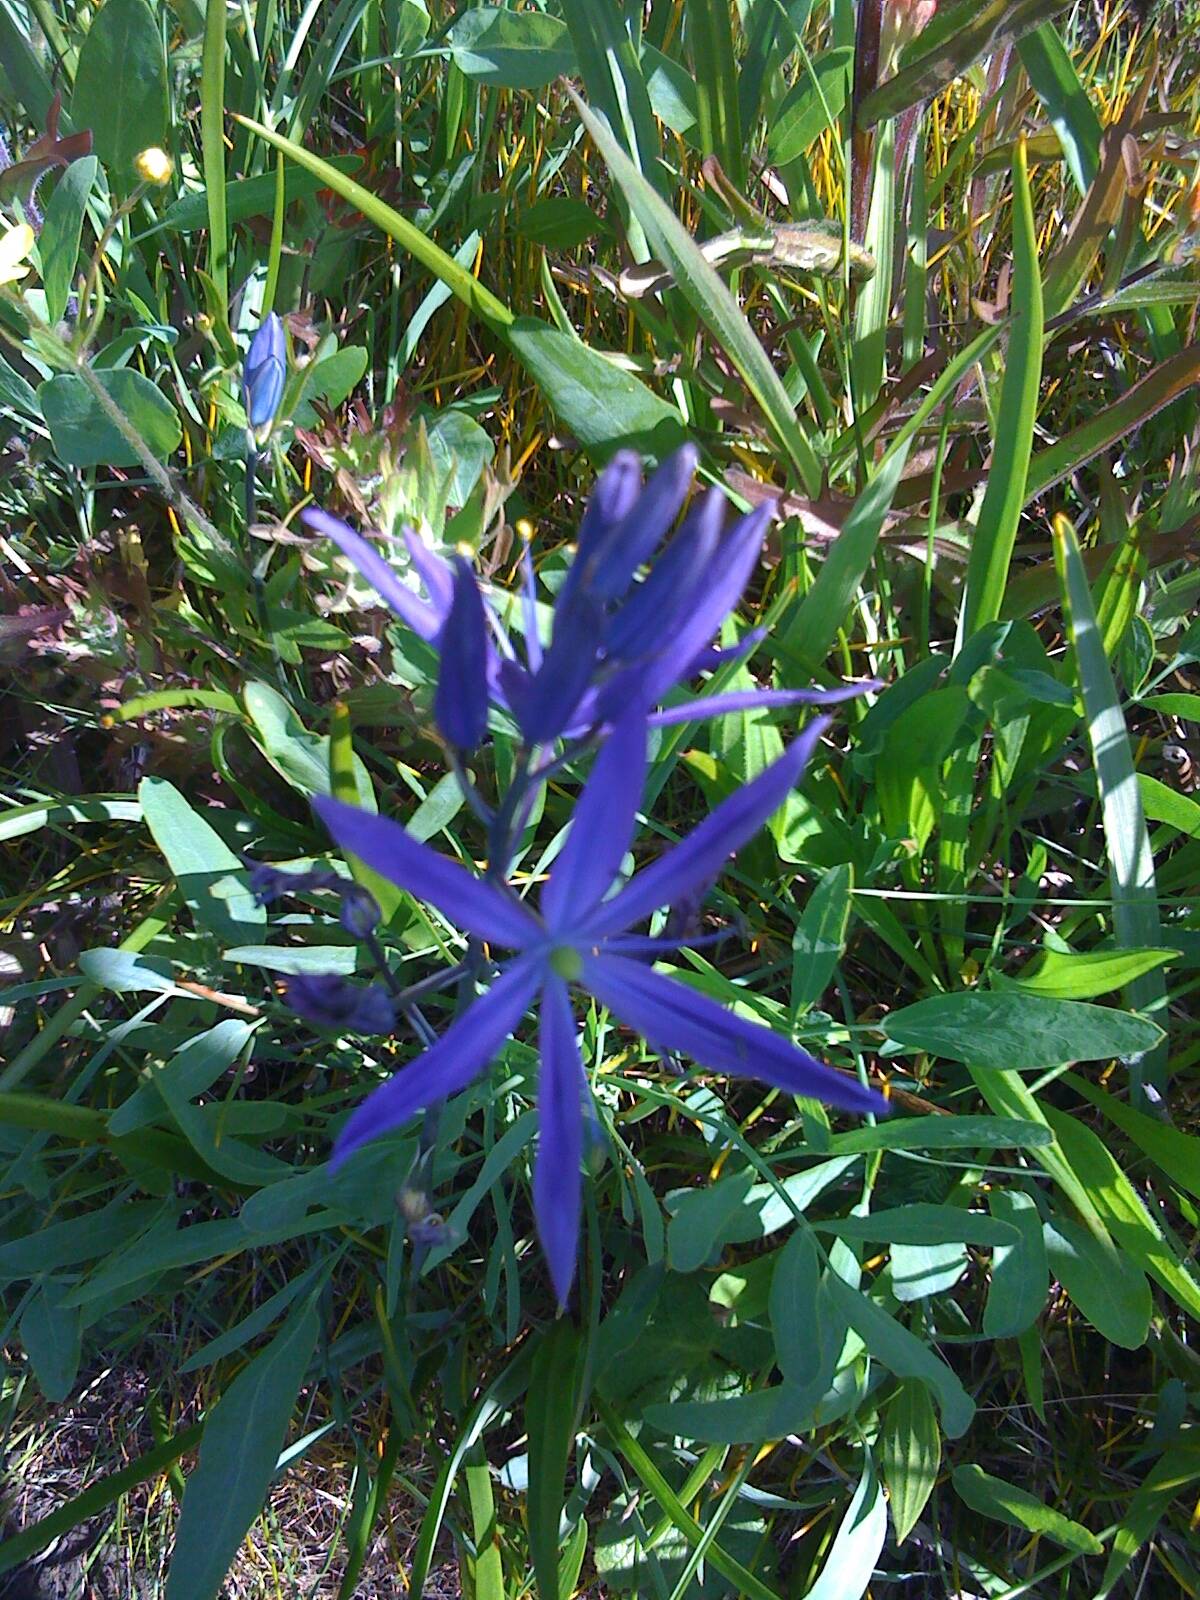 Contributed photo by the Master Gardeners of San Juan County
Common camas (Camassia quamash)